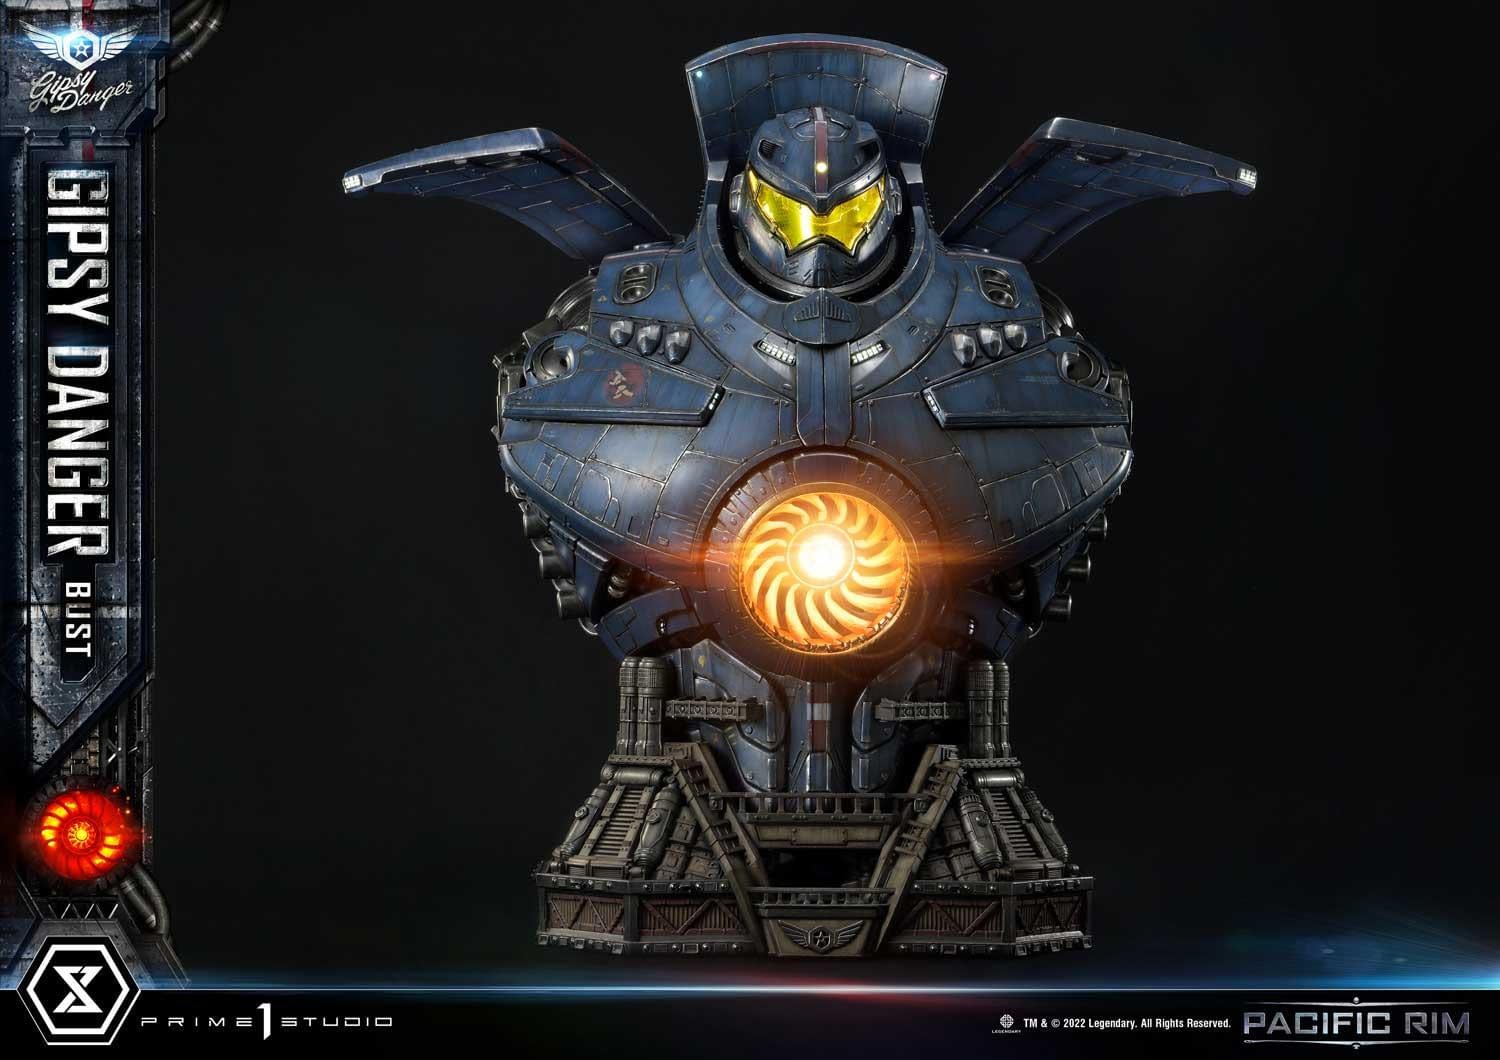 Pacific Rim Gipsy Danger Comes To Life With Prime Studio Statue Bust